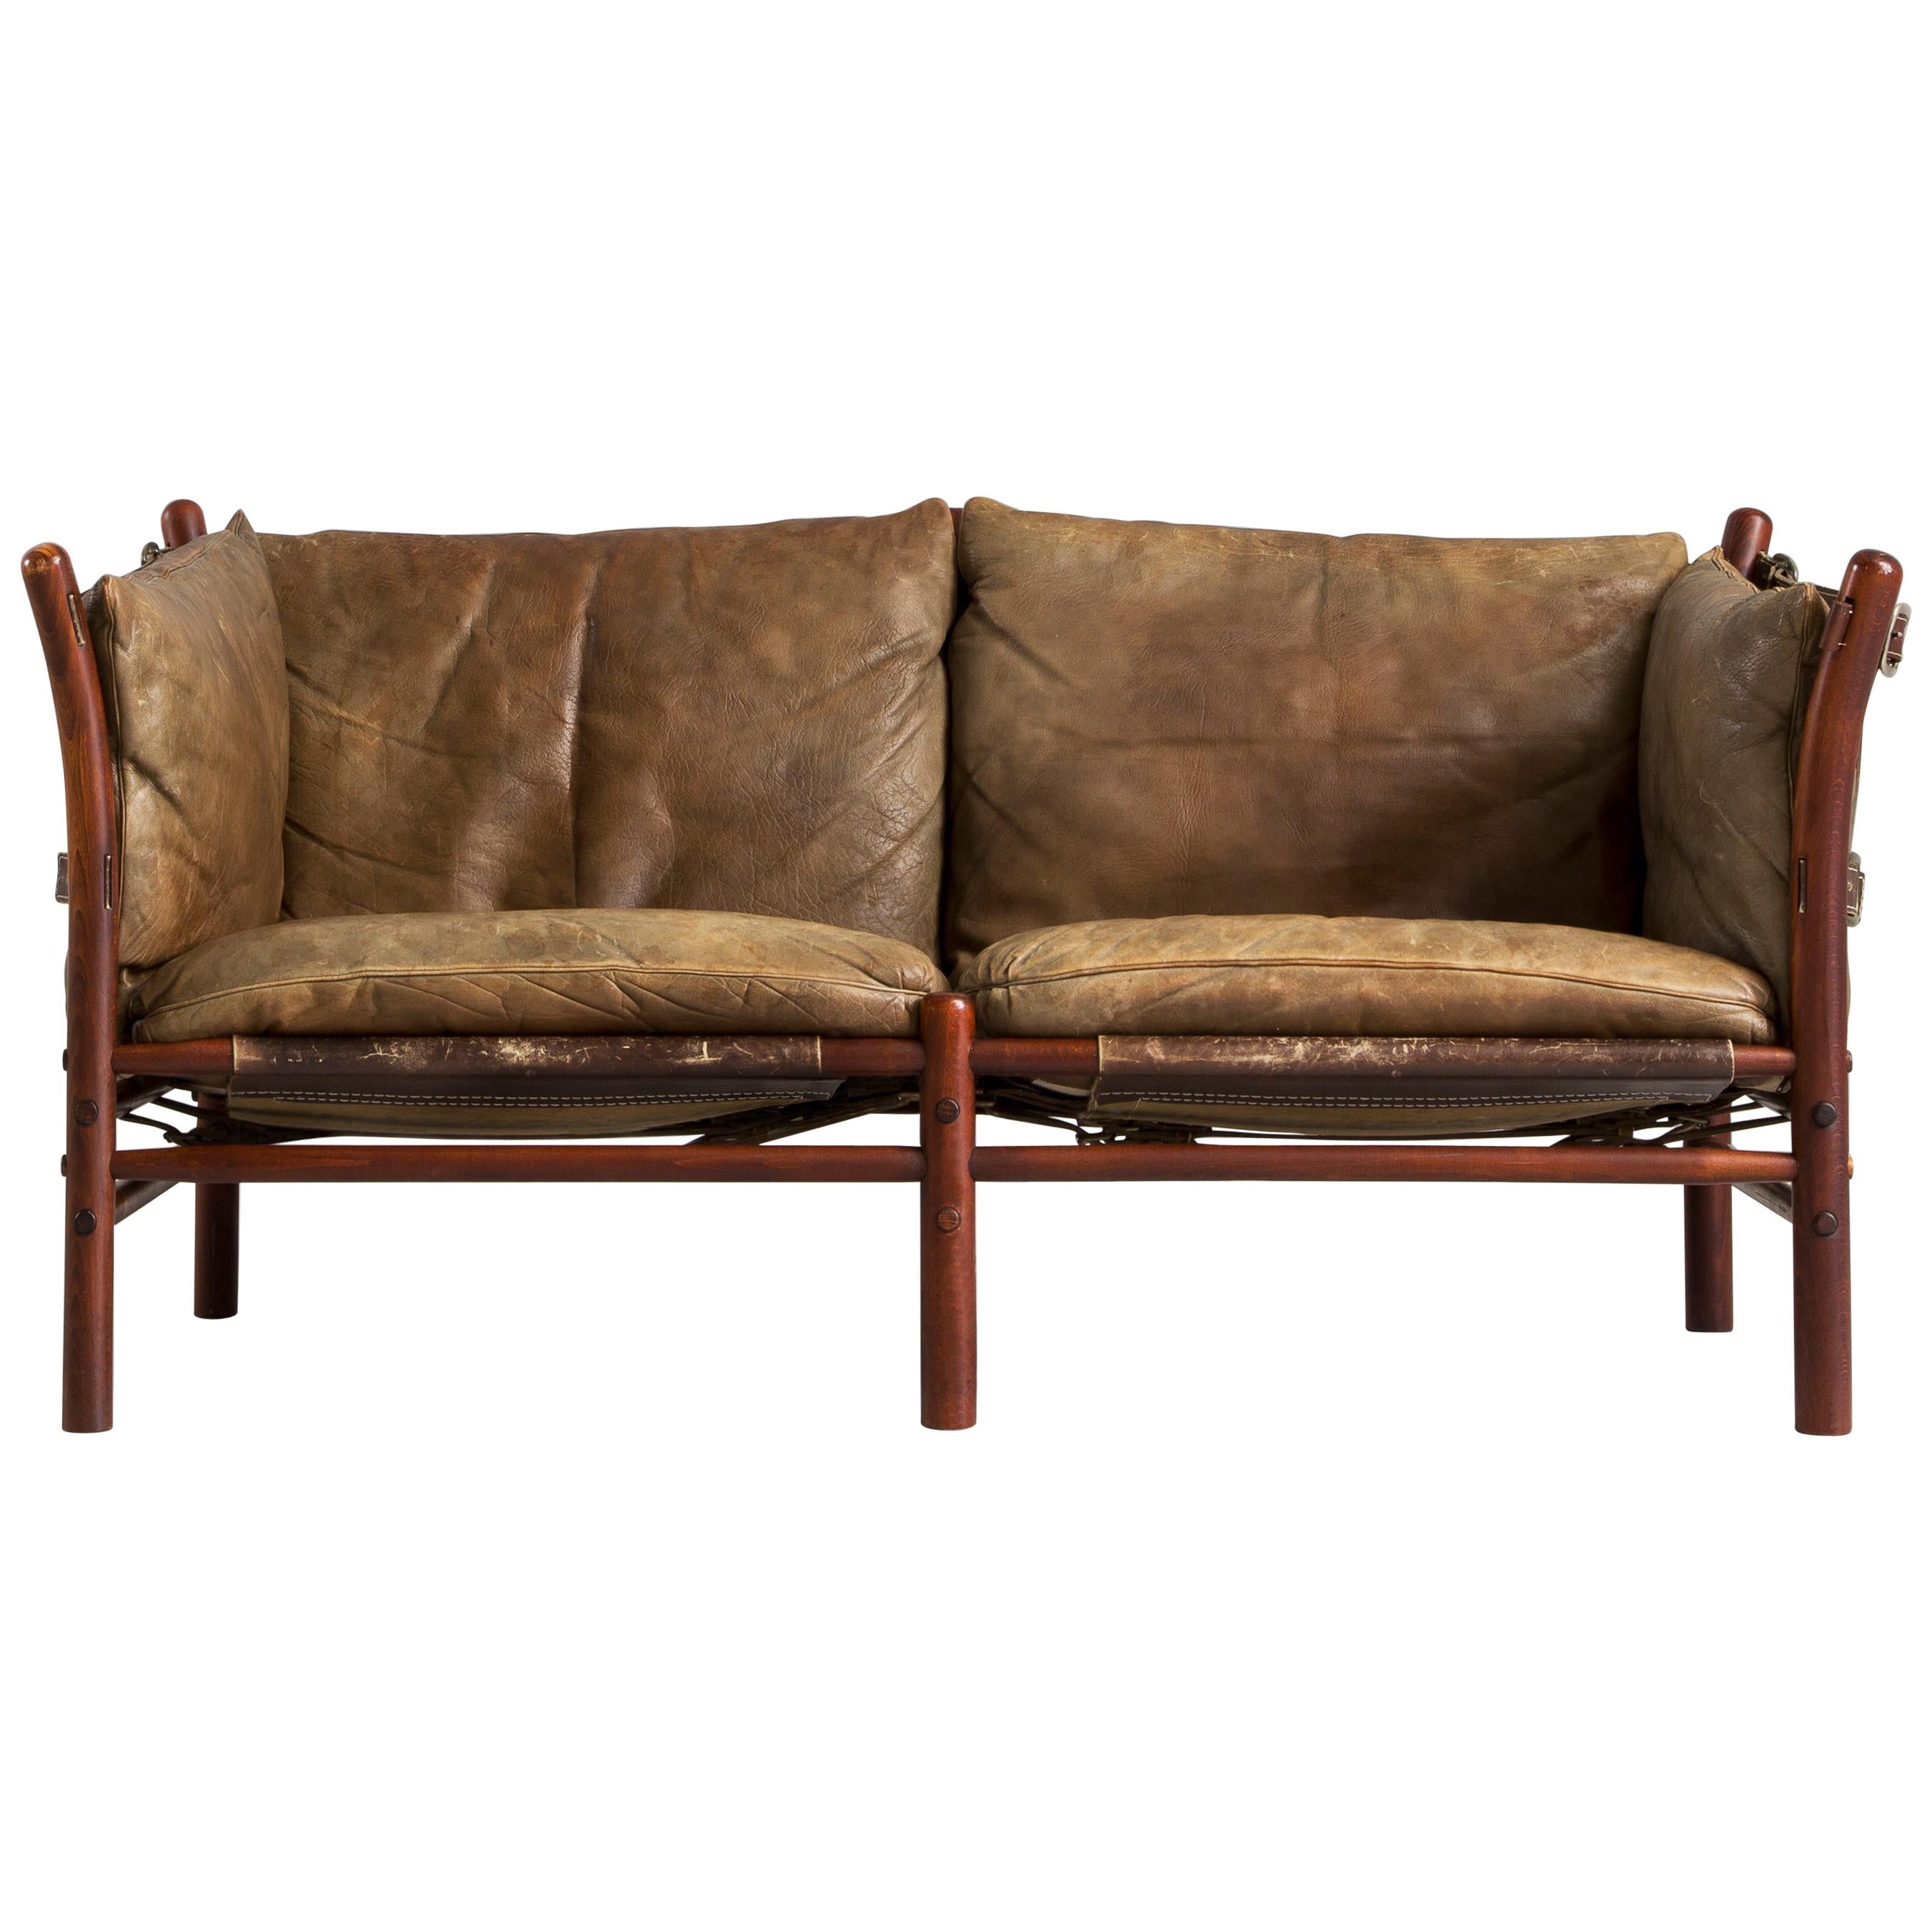 Arne Norell ‘Illona’ Sofa with Brown Patinated Leather